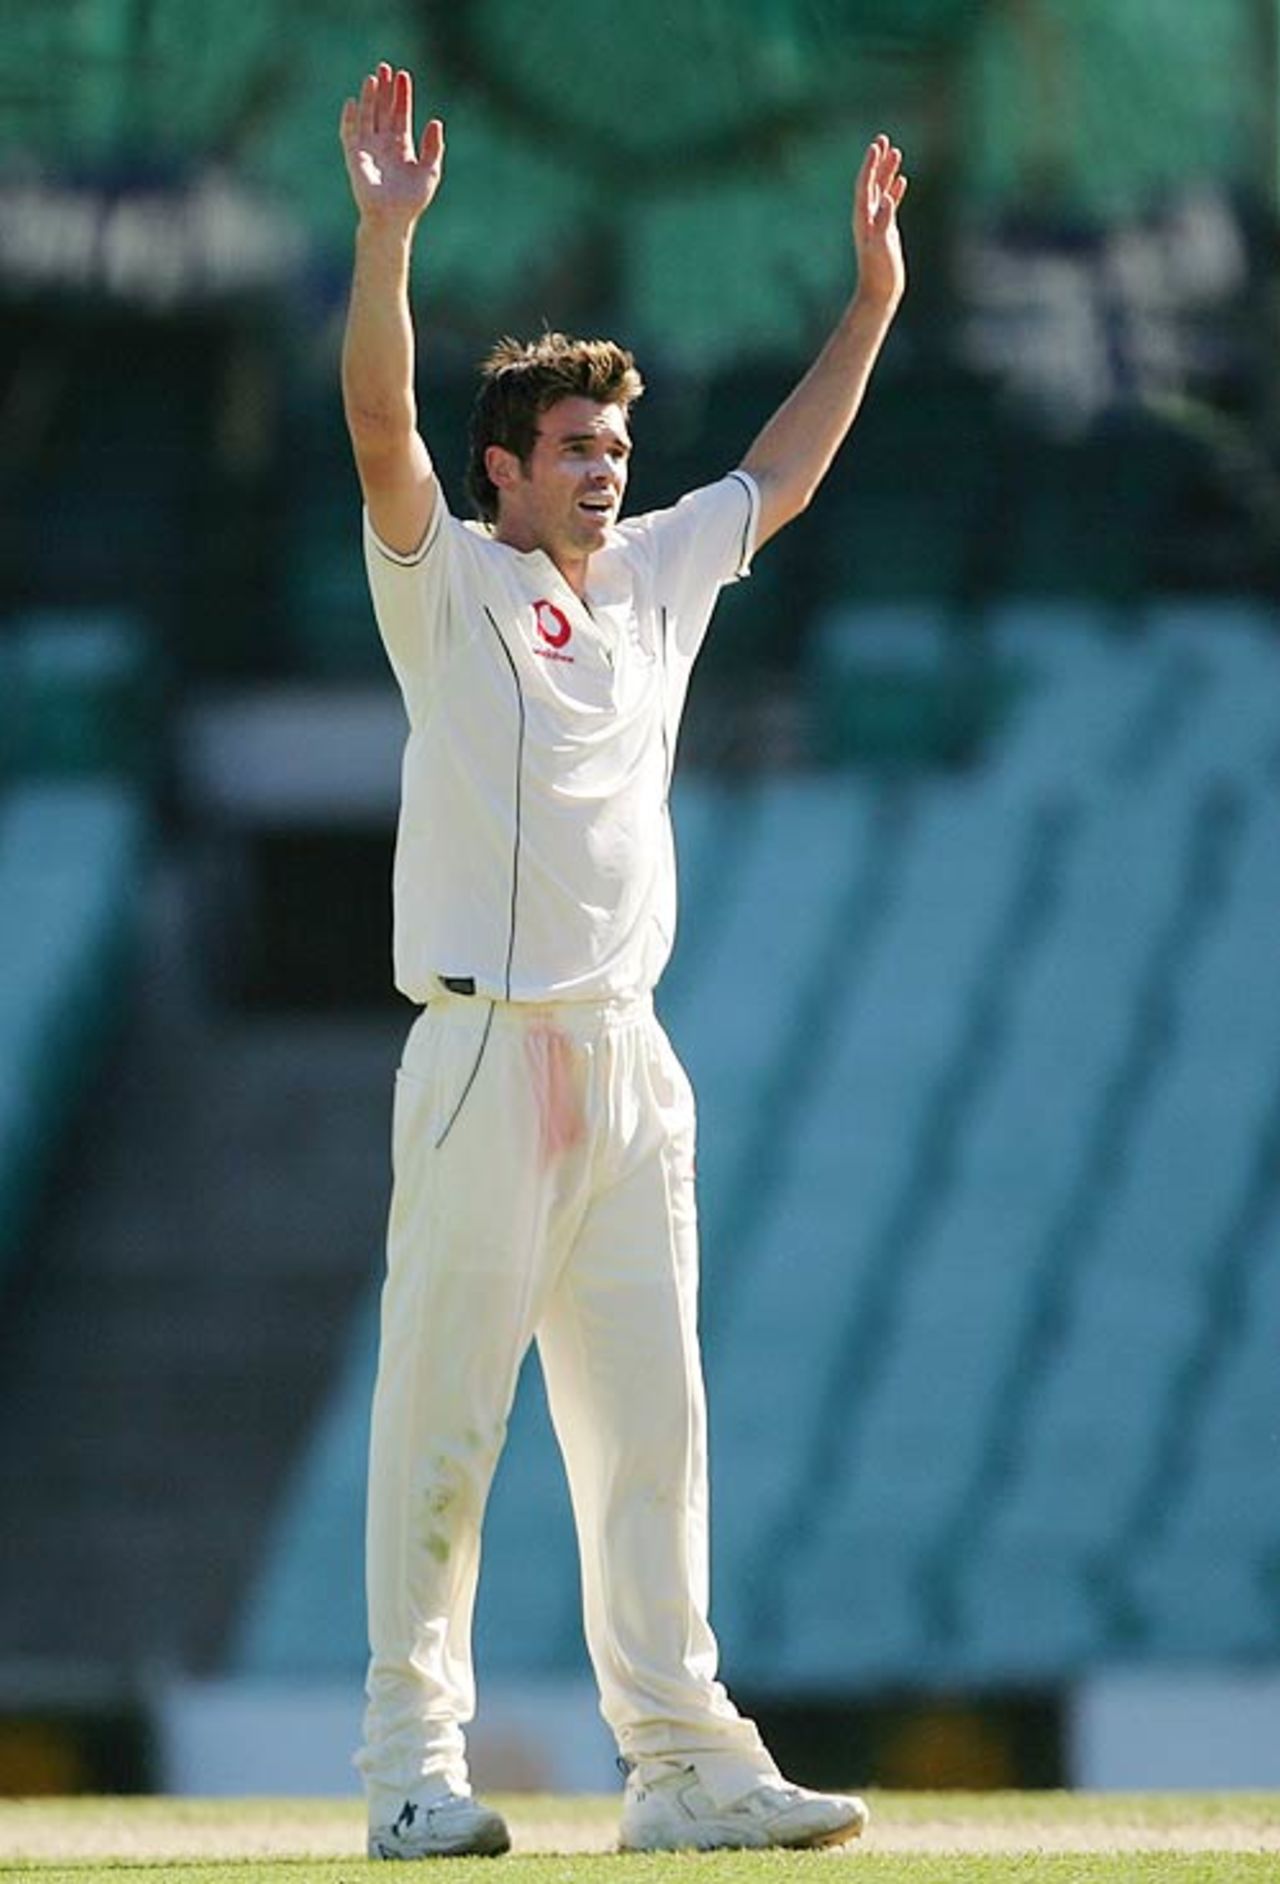 James Anderson picked up three quick wickets, New South Wales v England, Sydney, November 14, 2006